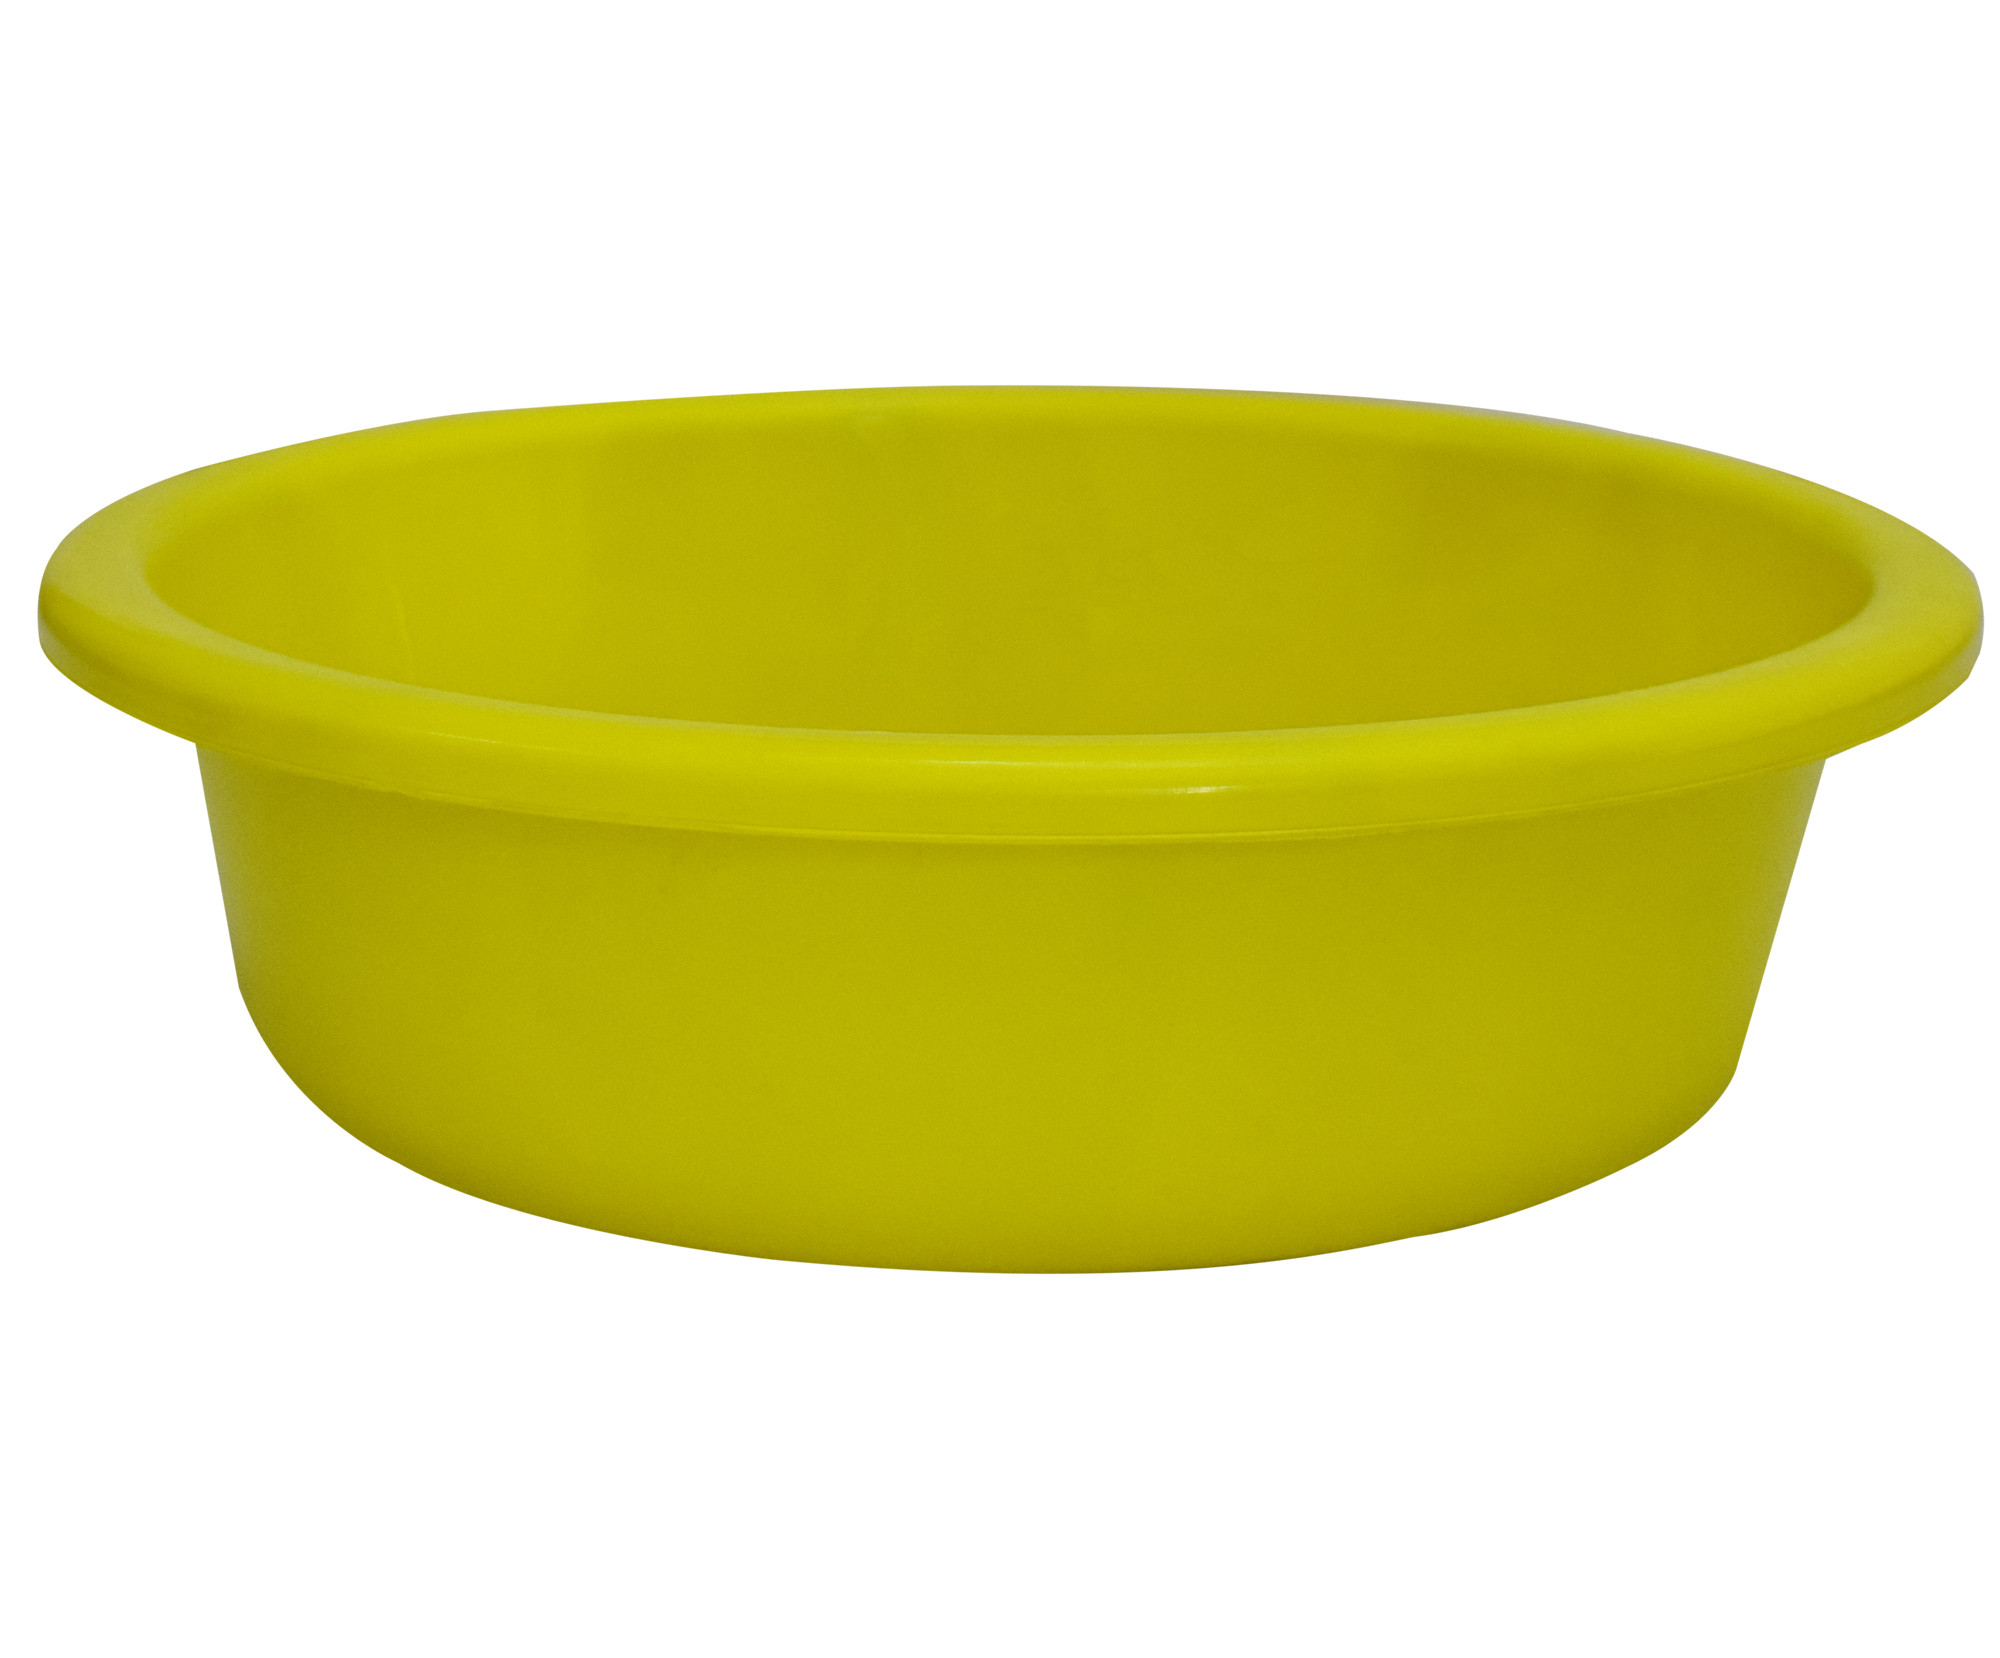 Kuber Industries Multiuses Unbreakable Plastic Knead Dough Basket/Basin Bowl For Home & Kitchen 6 Ltr- Pack of 2 (Green & White)